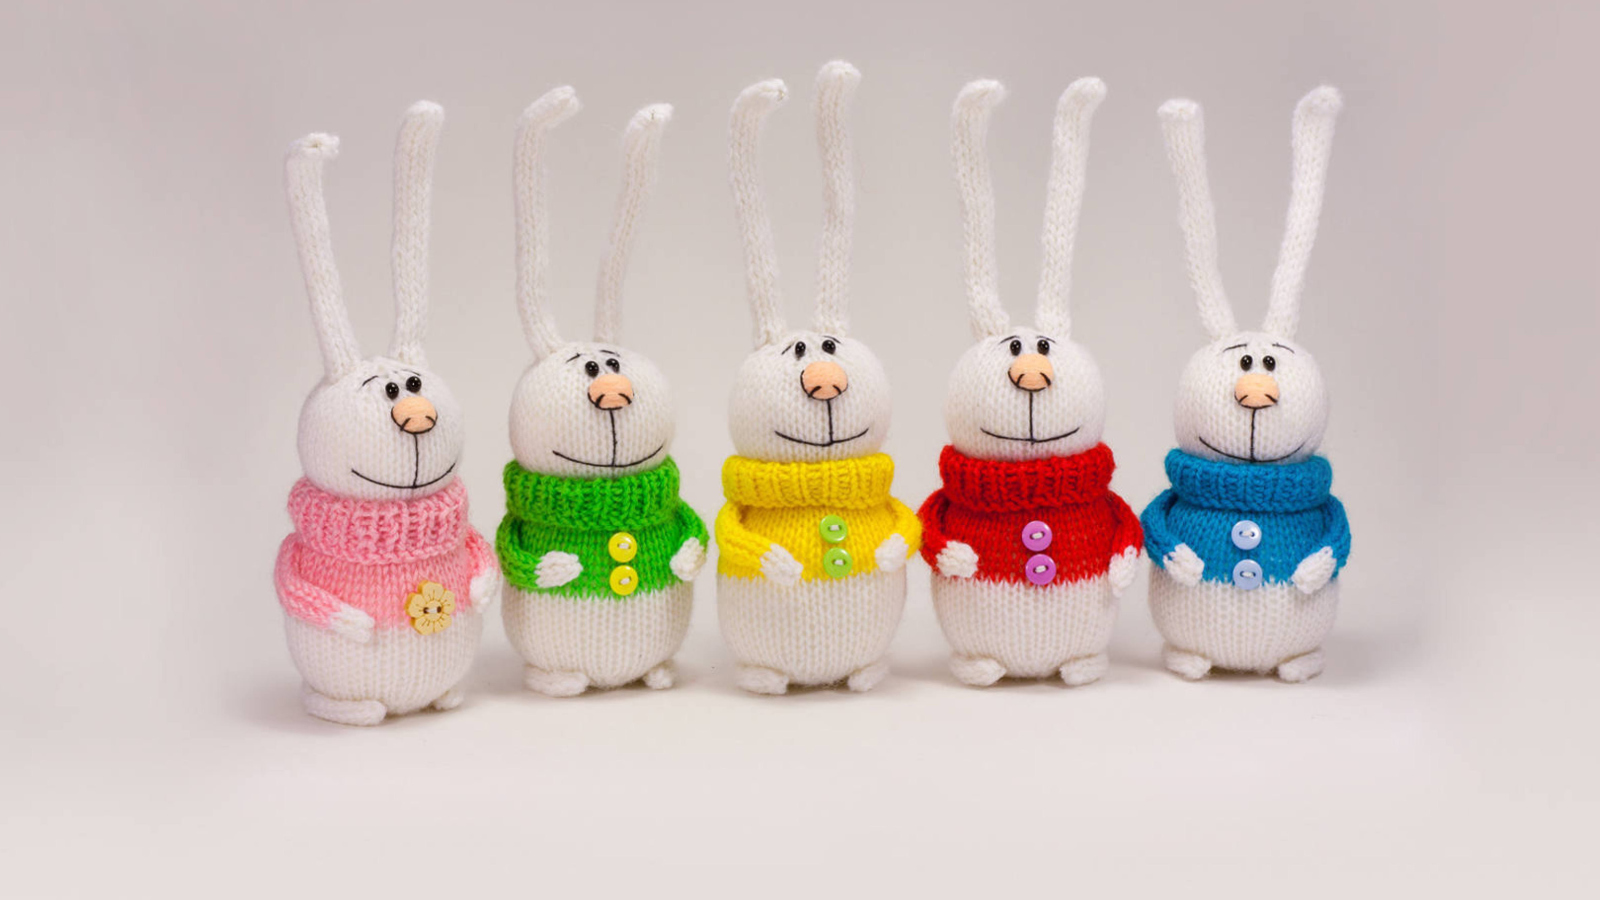 Funny Knitted Bunnies wallpaper 1600x900